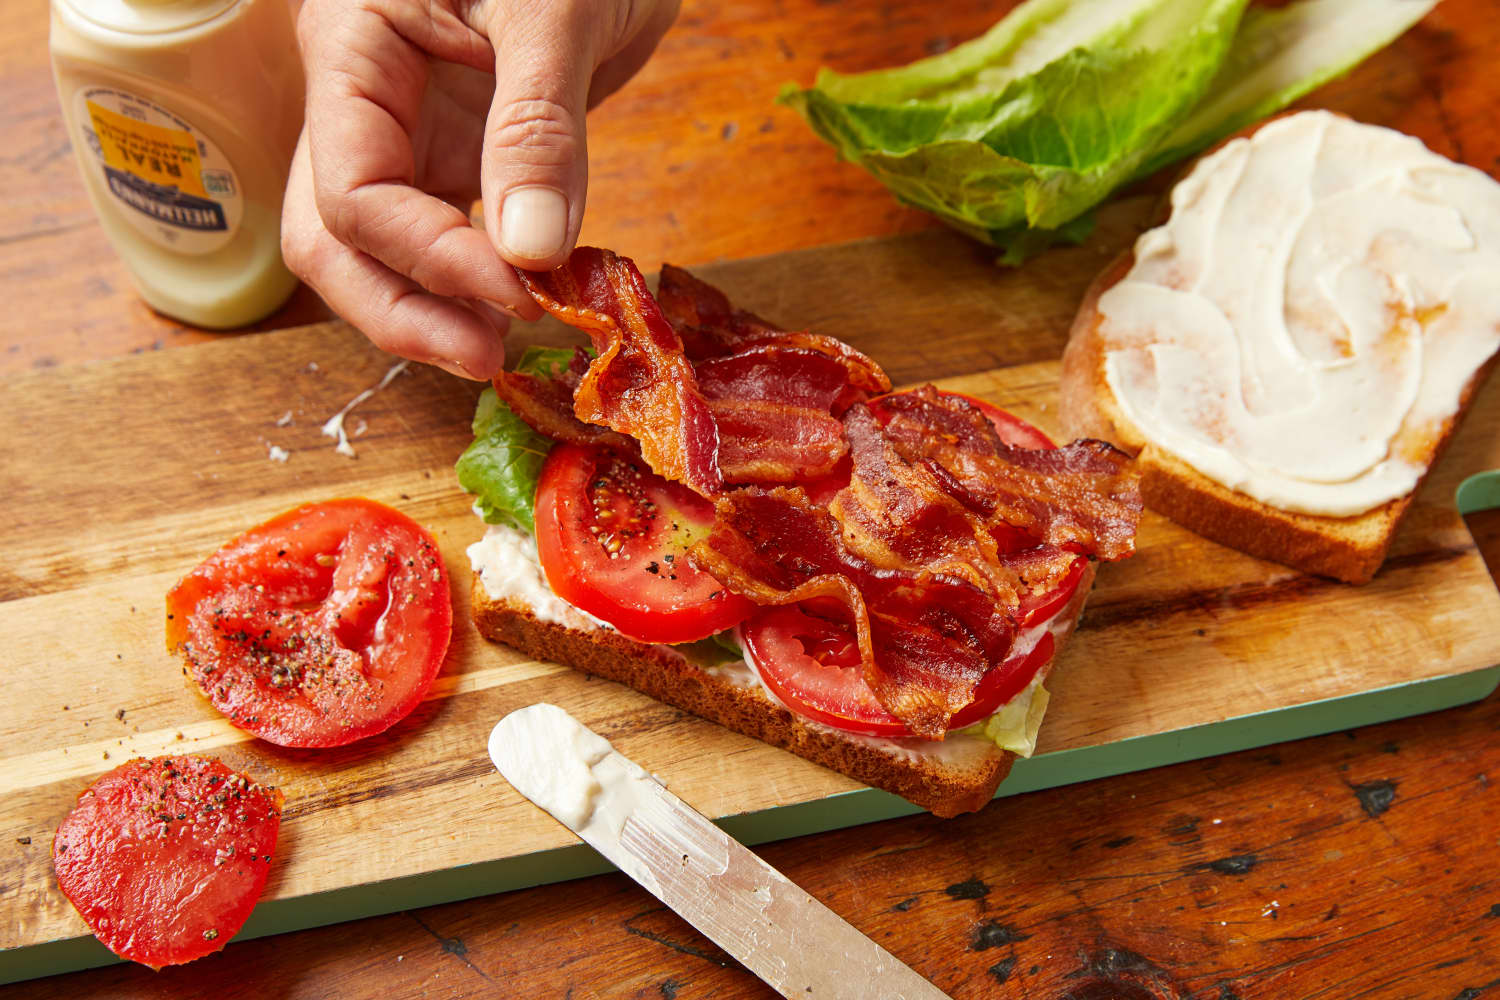 This Smart Trick Makes Subpar Tomatoes Worthy of a Perfect BLT